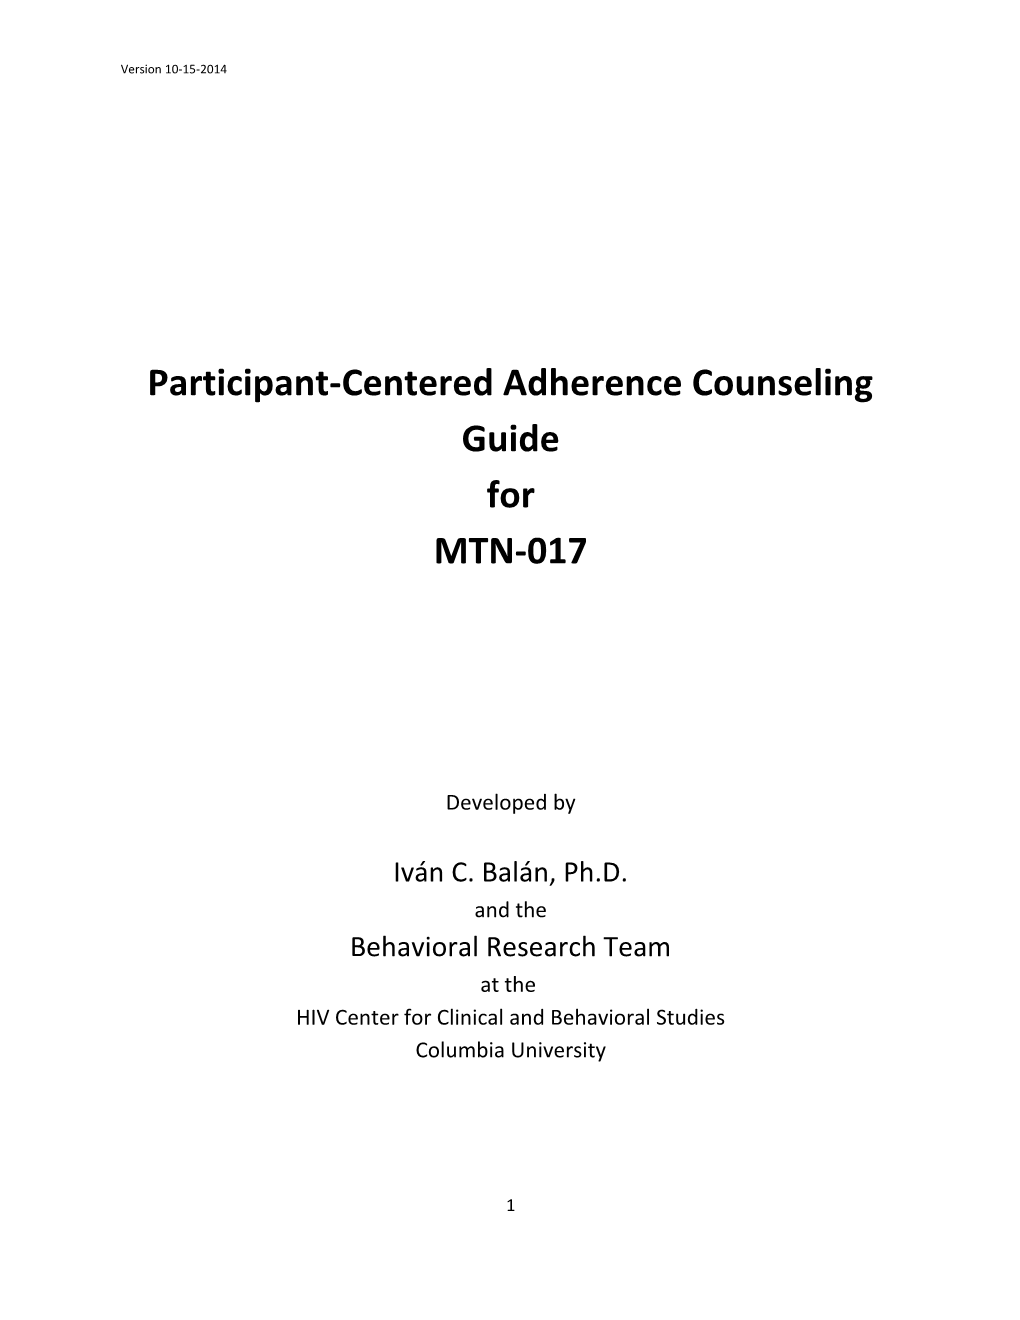 Participant-Centered Adherence Counseling Guide